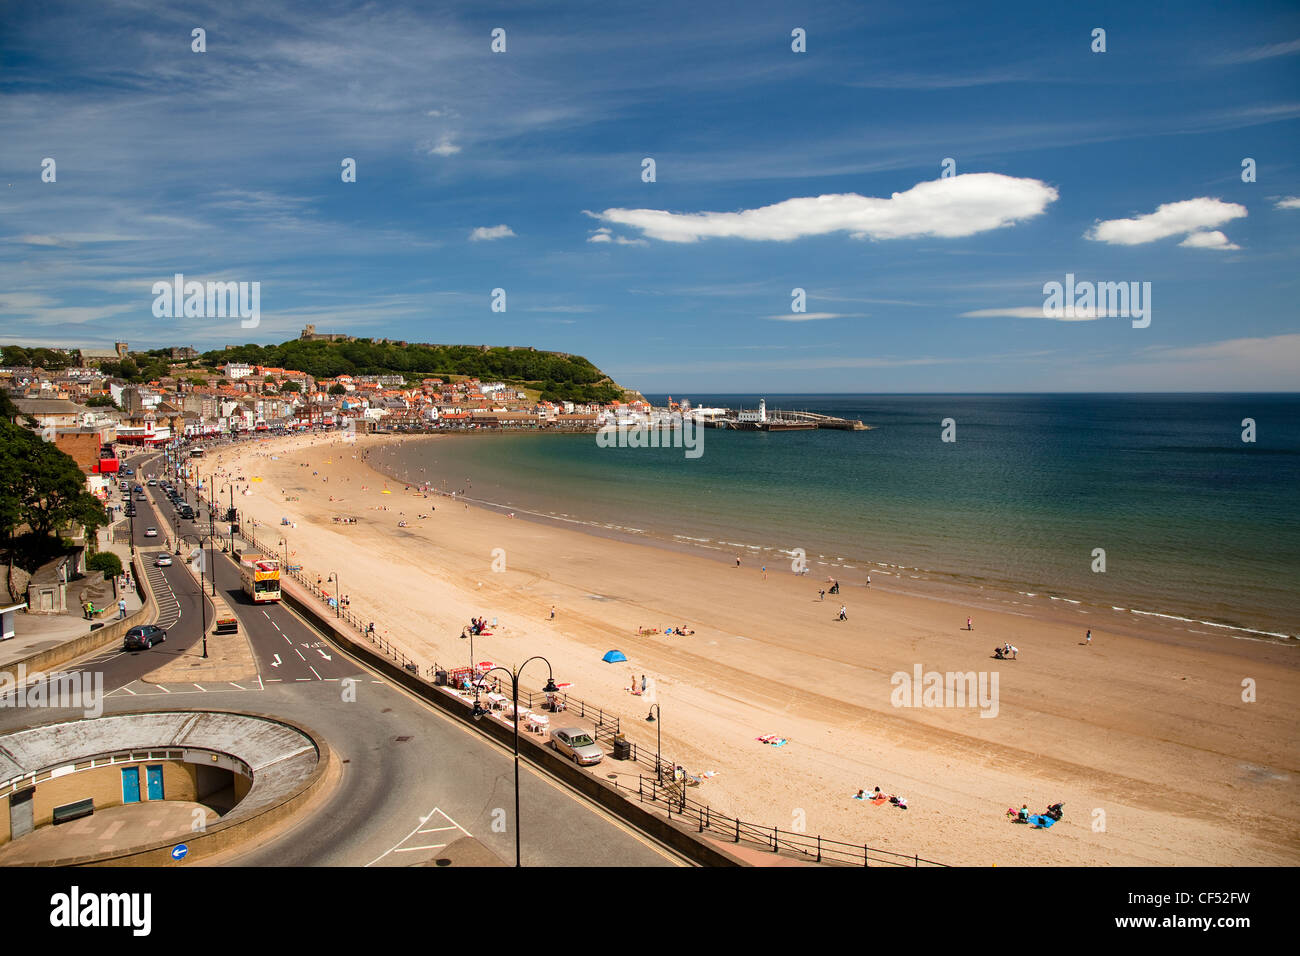 People relaxing on the South Bay beach at Scarborough. Stock Photo